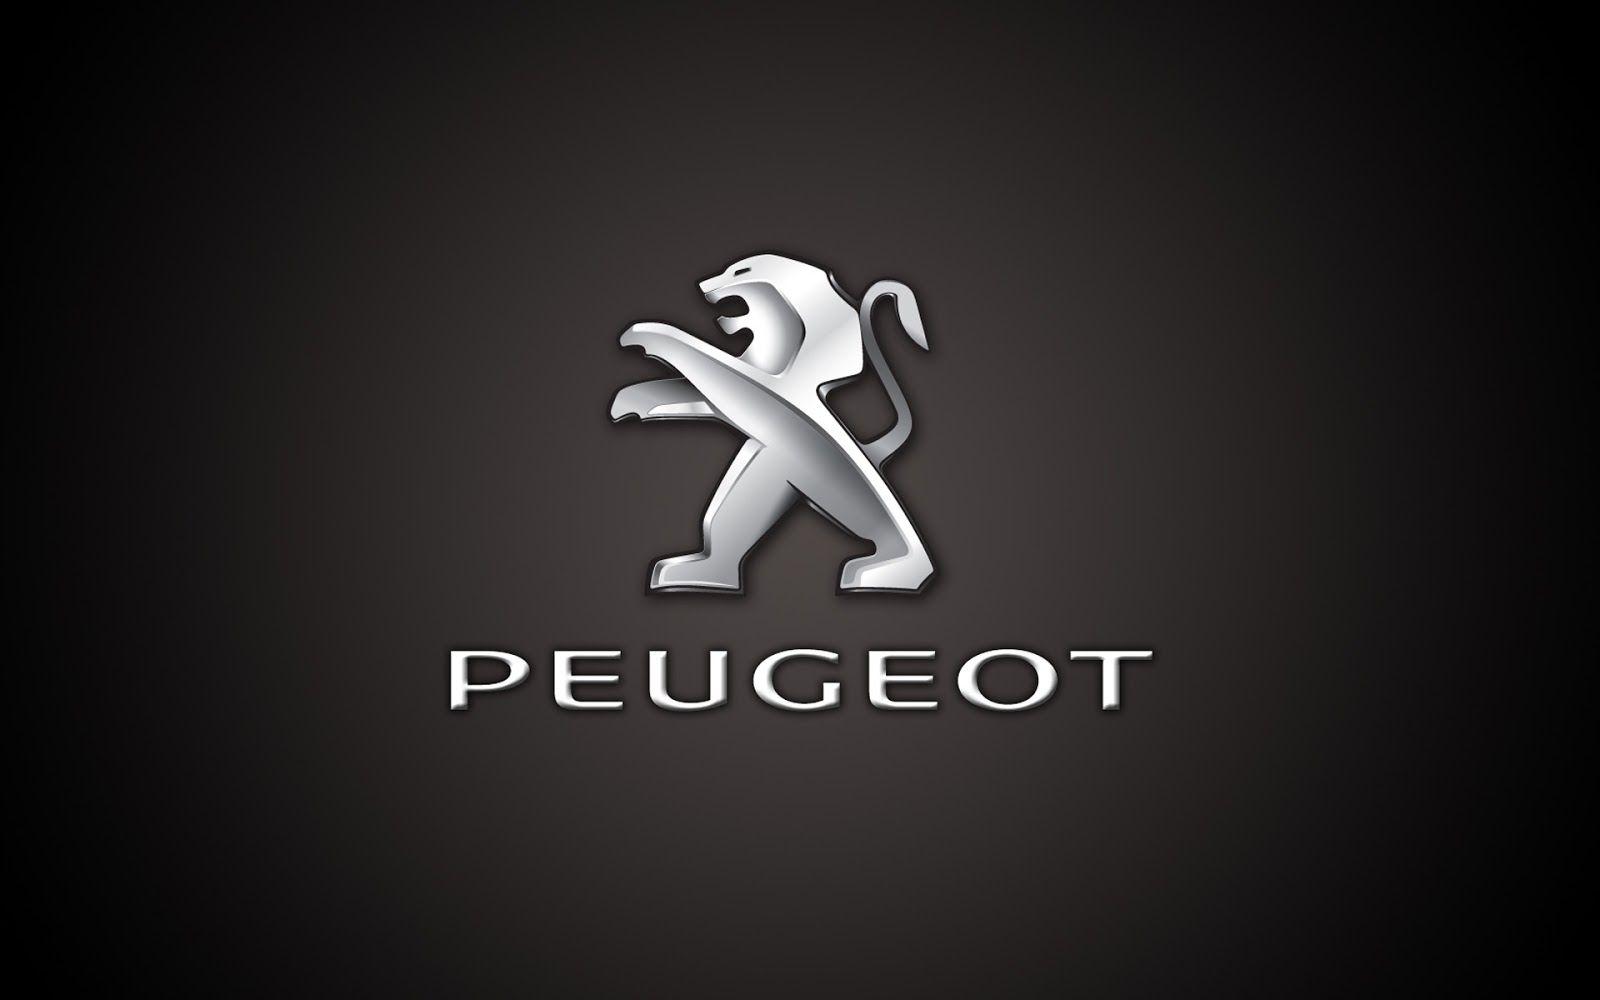 Peugeot Logo - Peugeot Logo, Peugeot Car Symbol Meaning and History. Car Brand